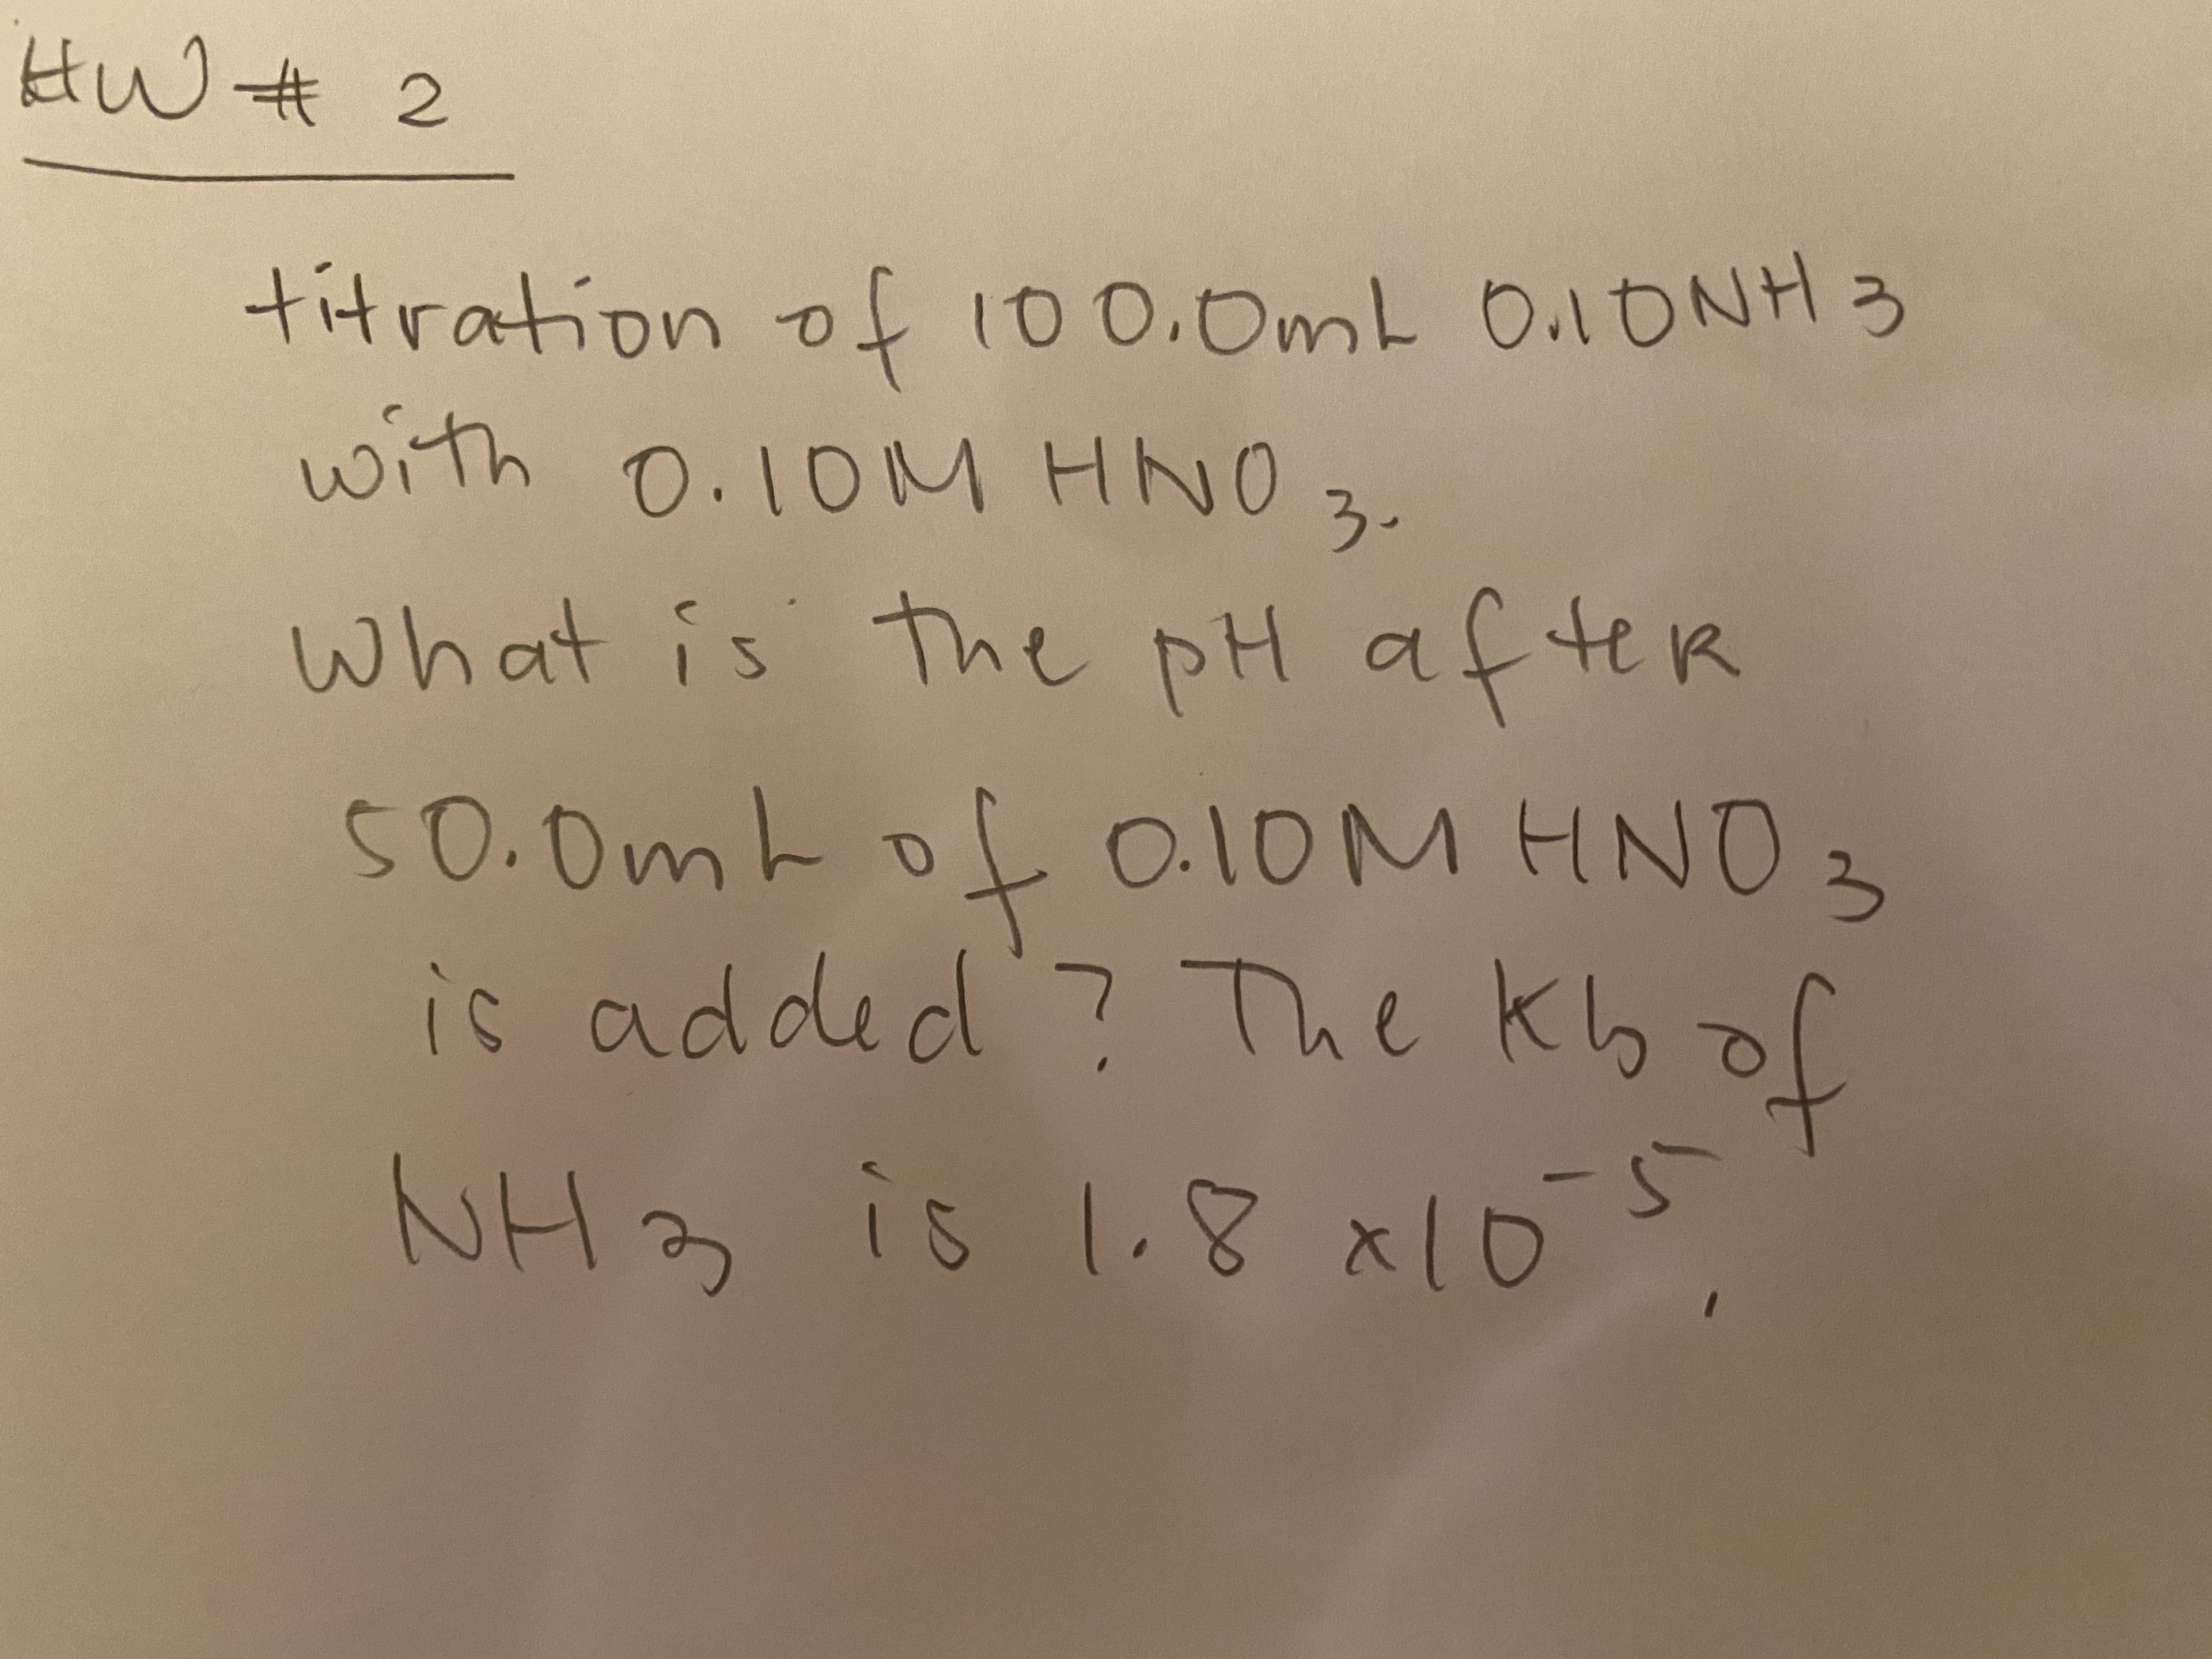 ritration of 100.0mL 0.1ONH 3
with
1on-
0.10M HN0 3.
what is the pH afteR
50.0mL oL O.10M HNO
